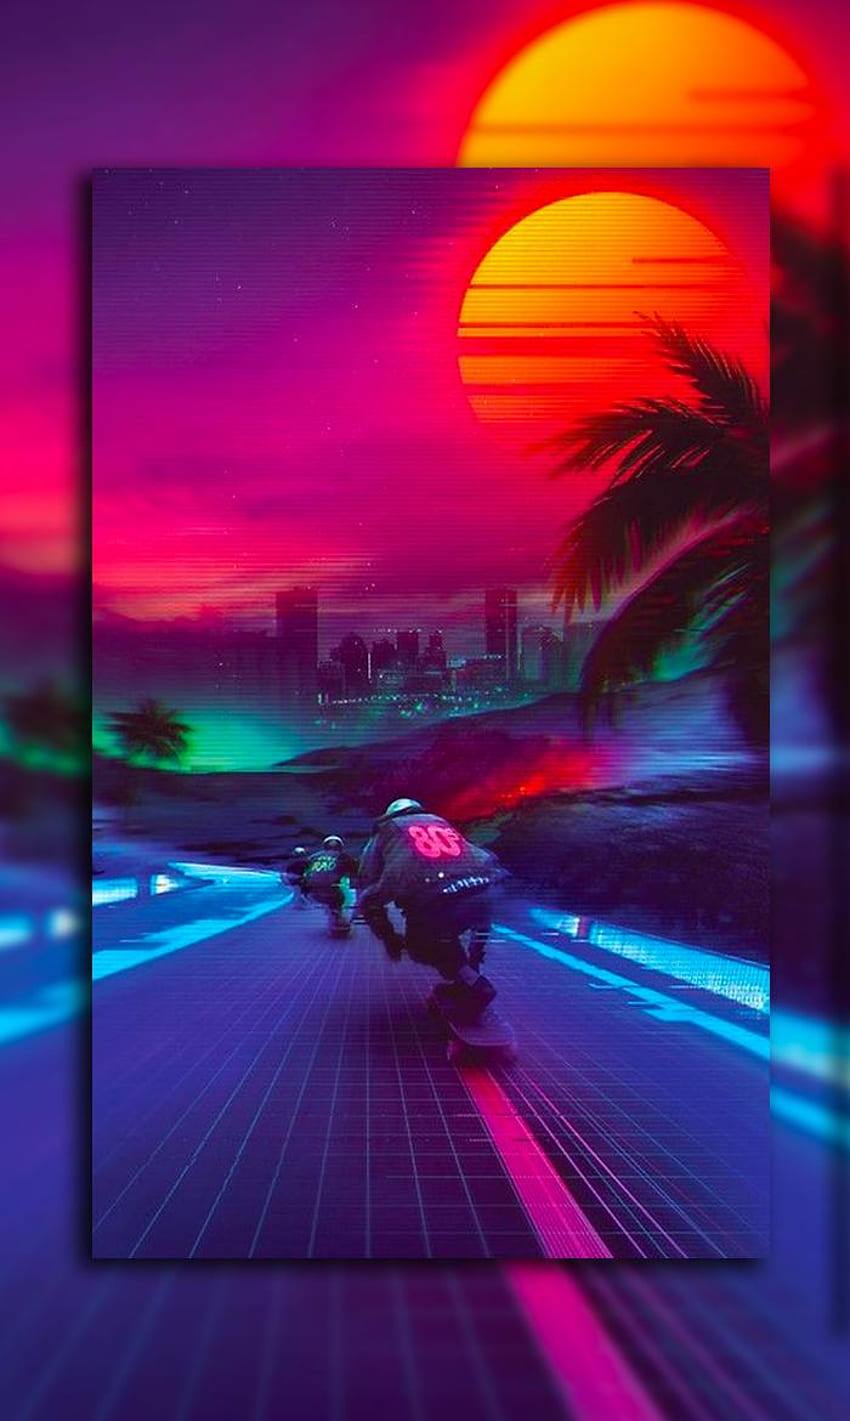 1290x2796px, 2K Free download | 80s Aesthetic, Vibey HD phone wallpaper ...